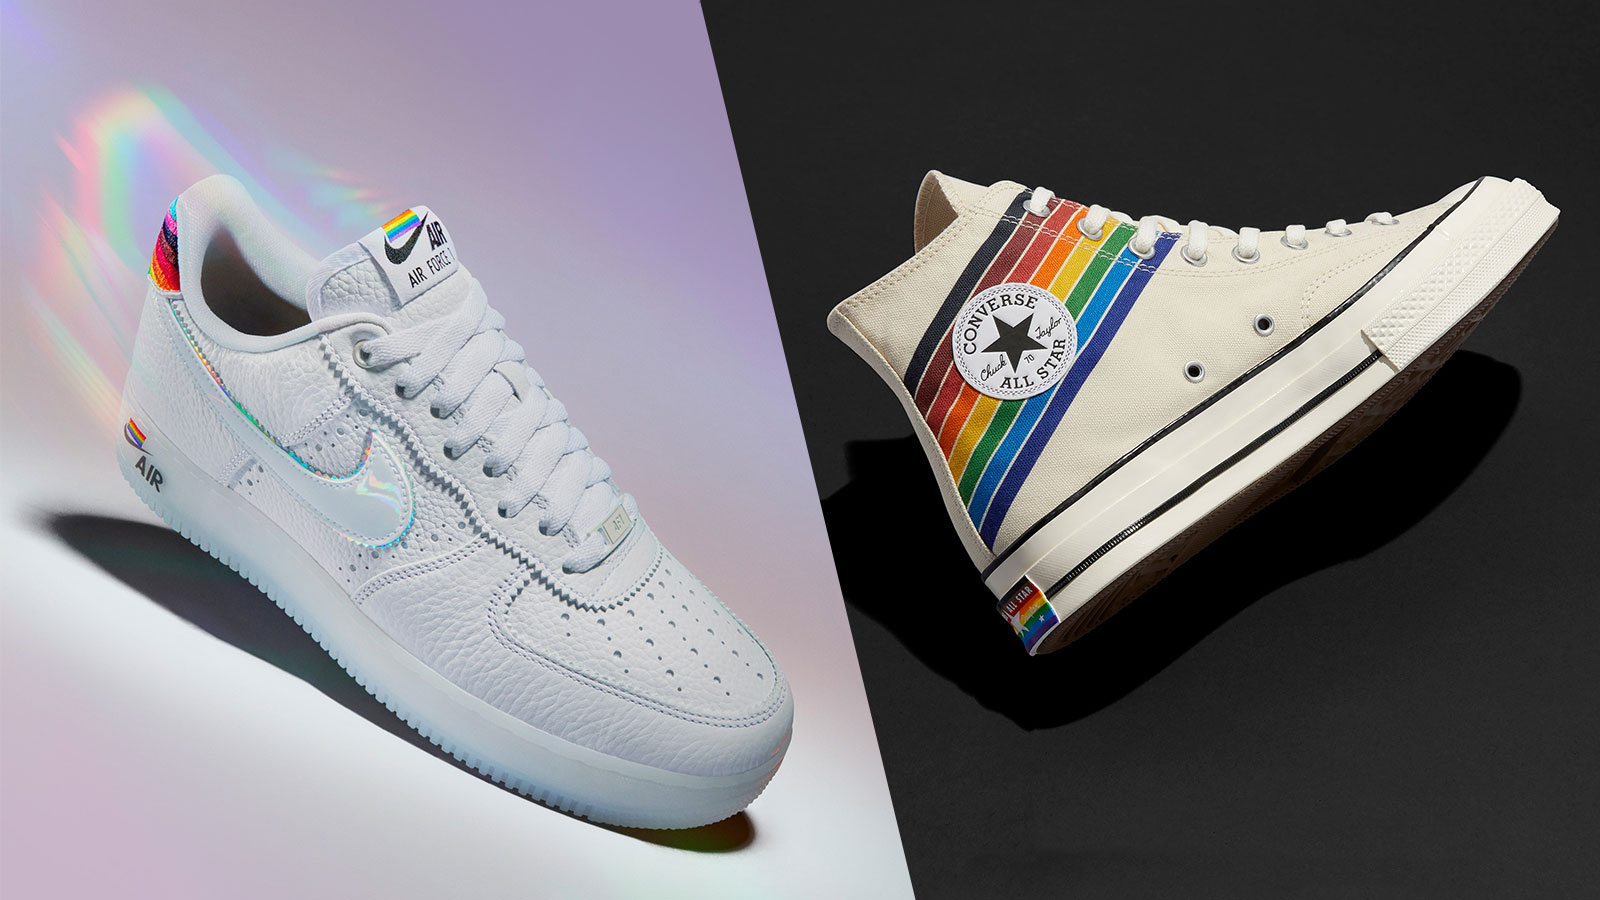 Nike BeTrue and the Converse Pride Footwear 2020 Collections